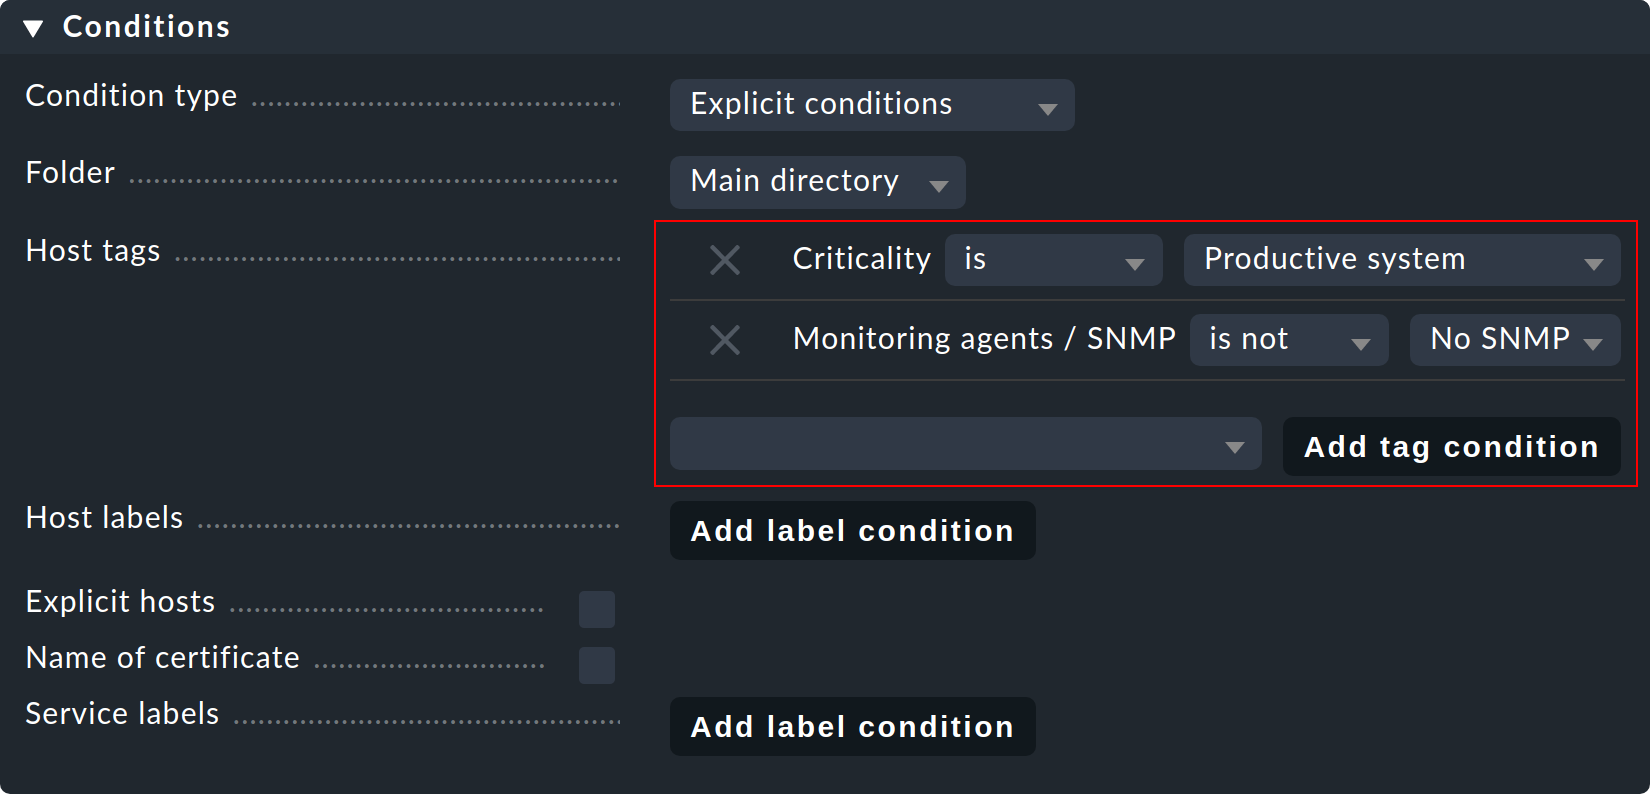 Specifying multiple host tags in one condition.